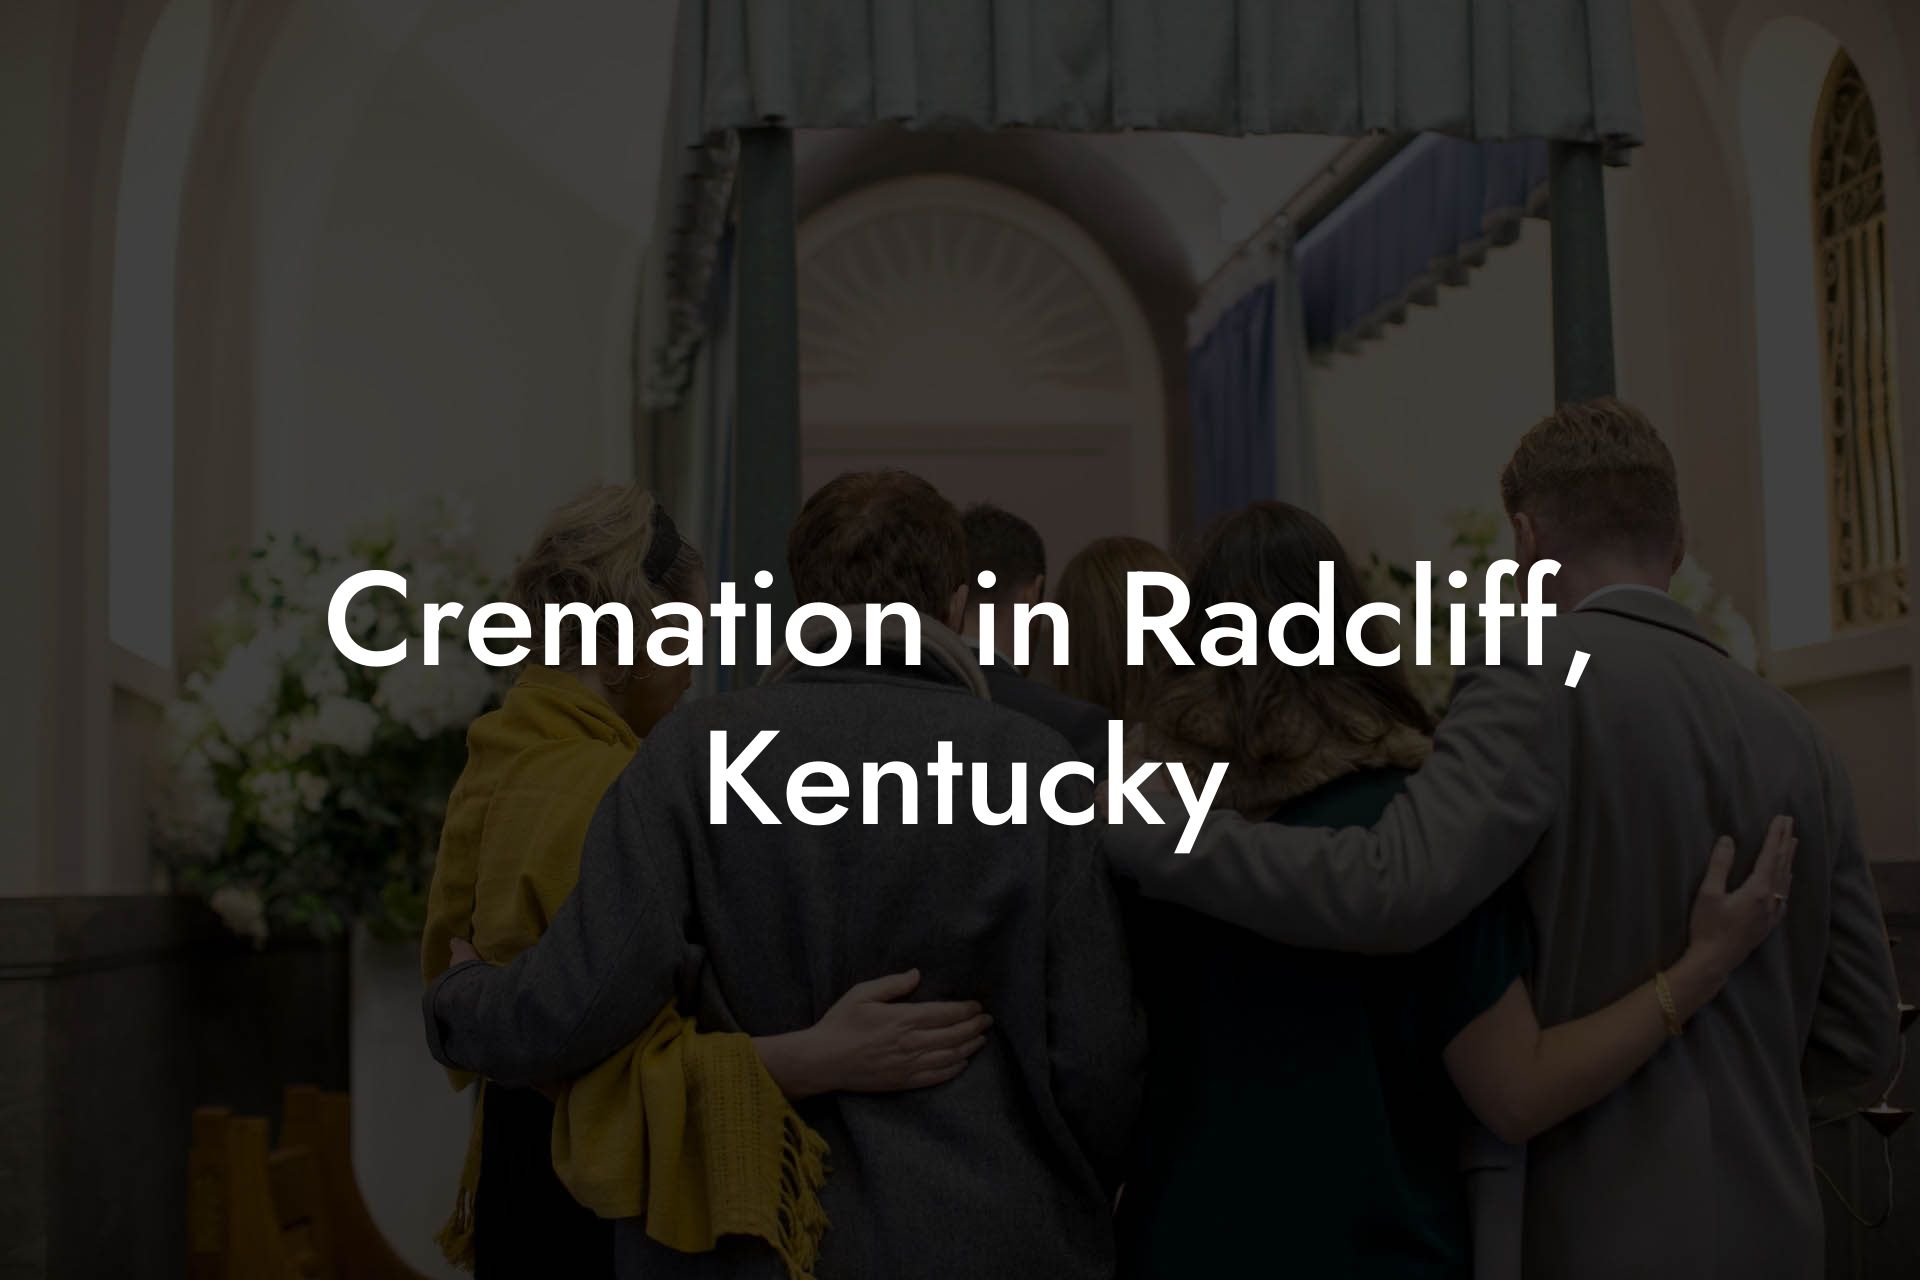 Cremation in Radcliff, Kentucky